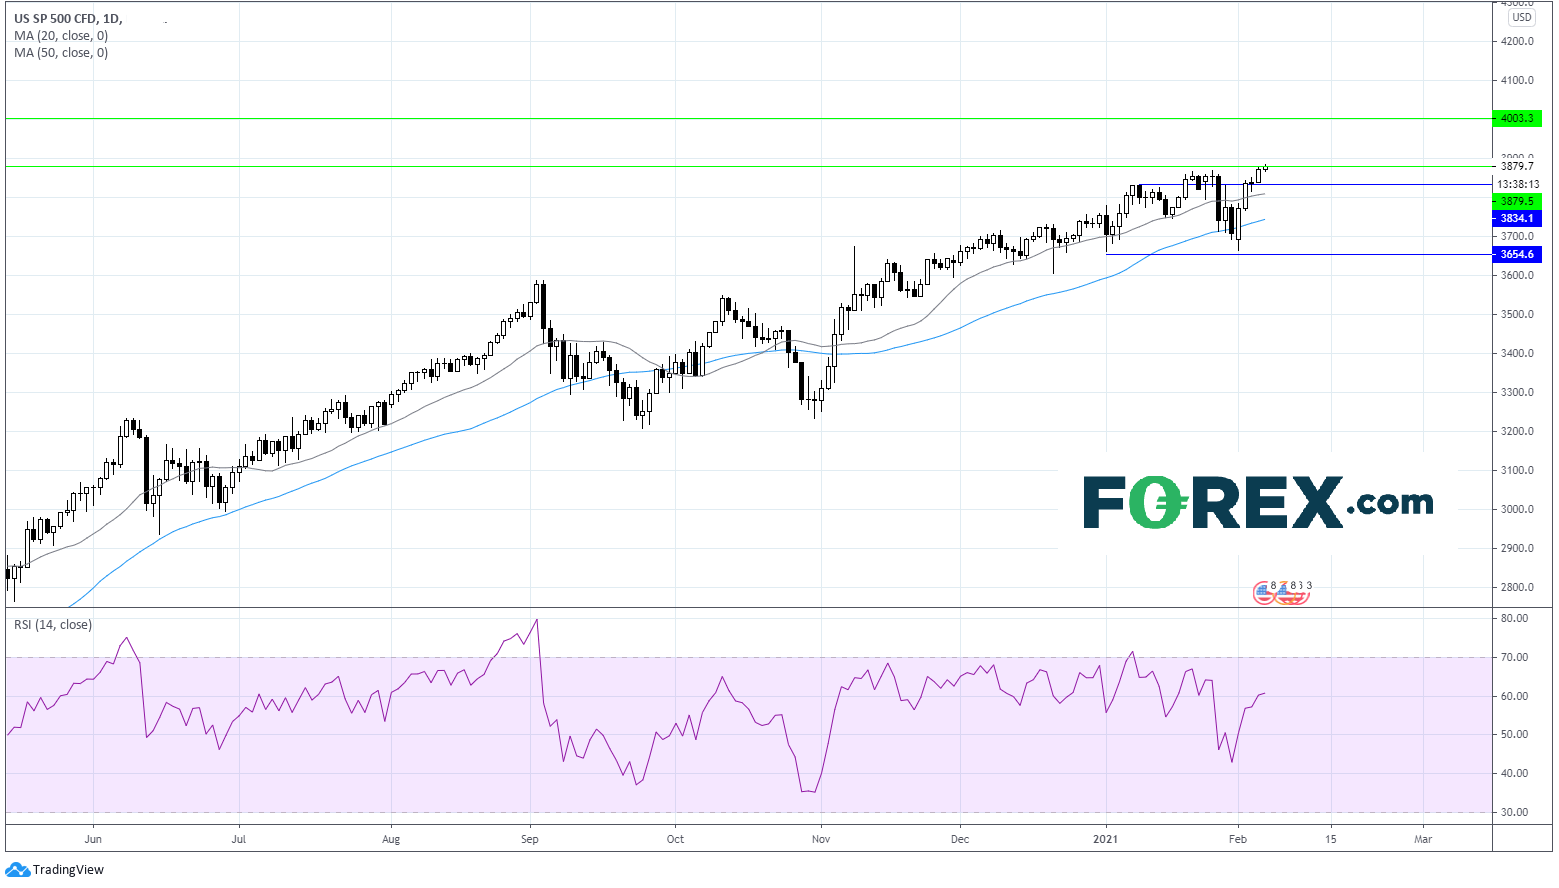 Chart analysis shows US SP 500 CFD. Published in May 2021 by FOREX.com